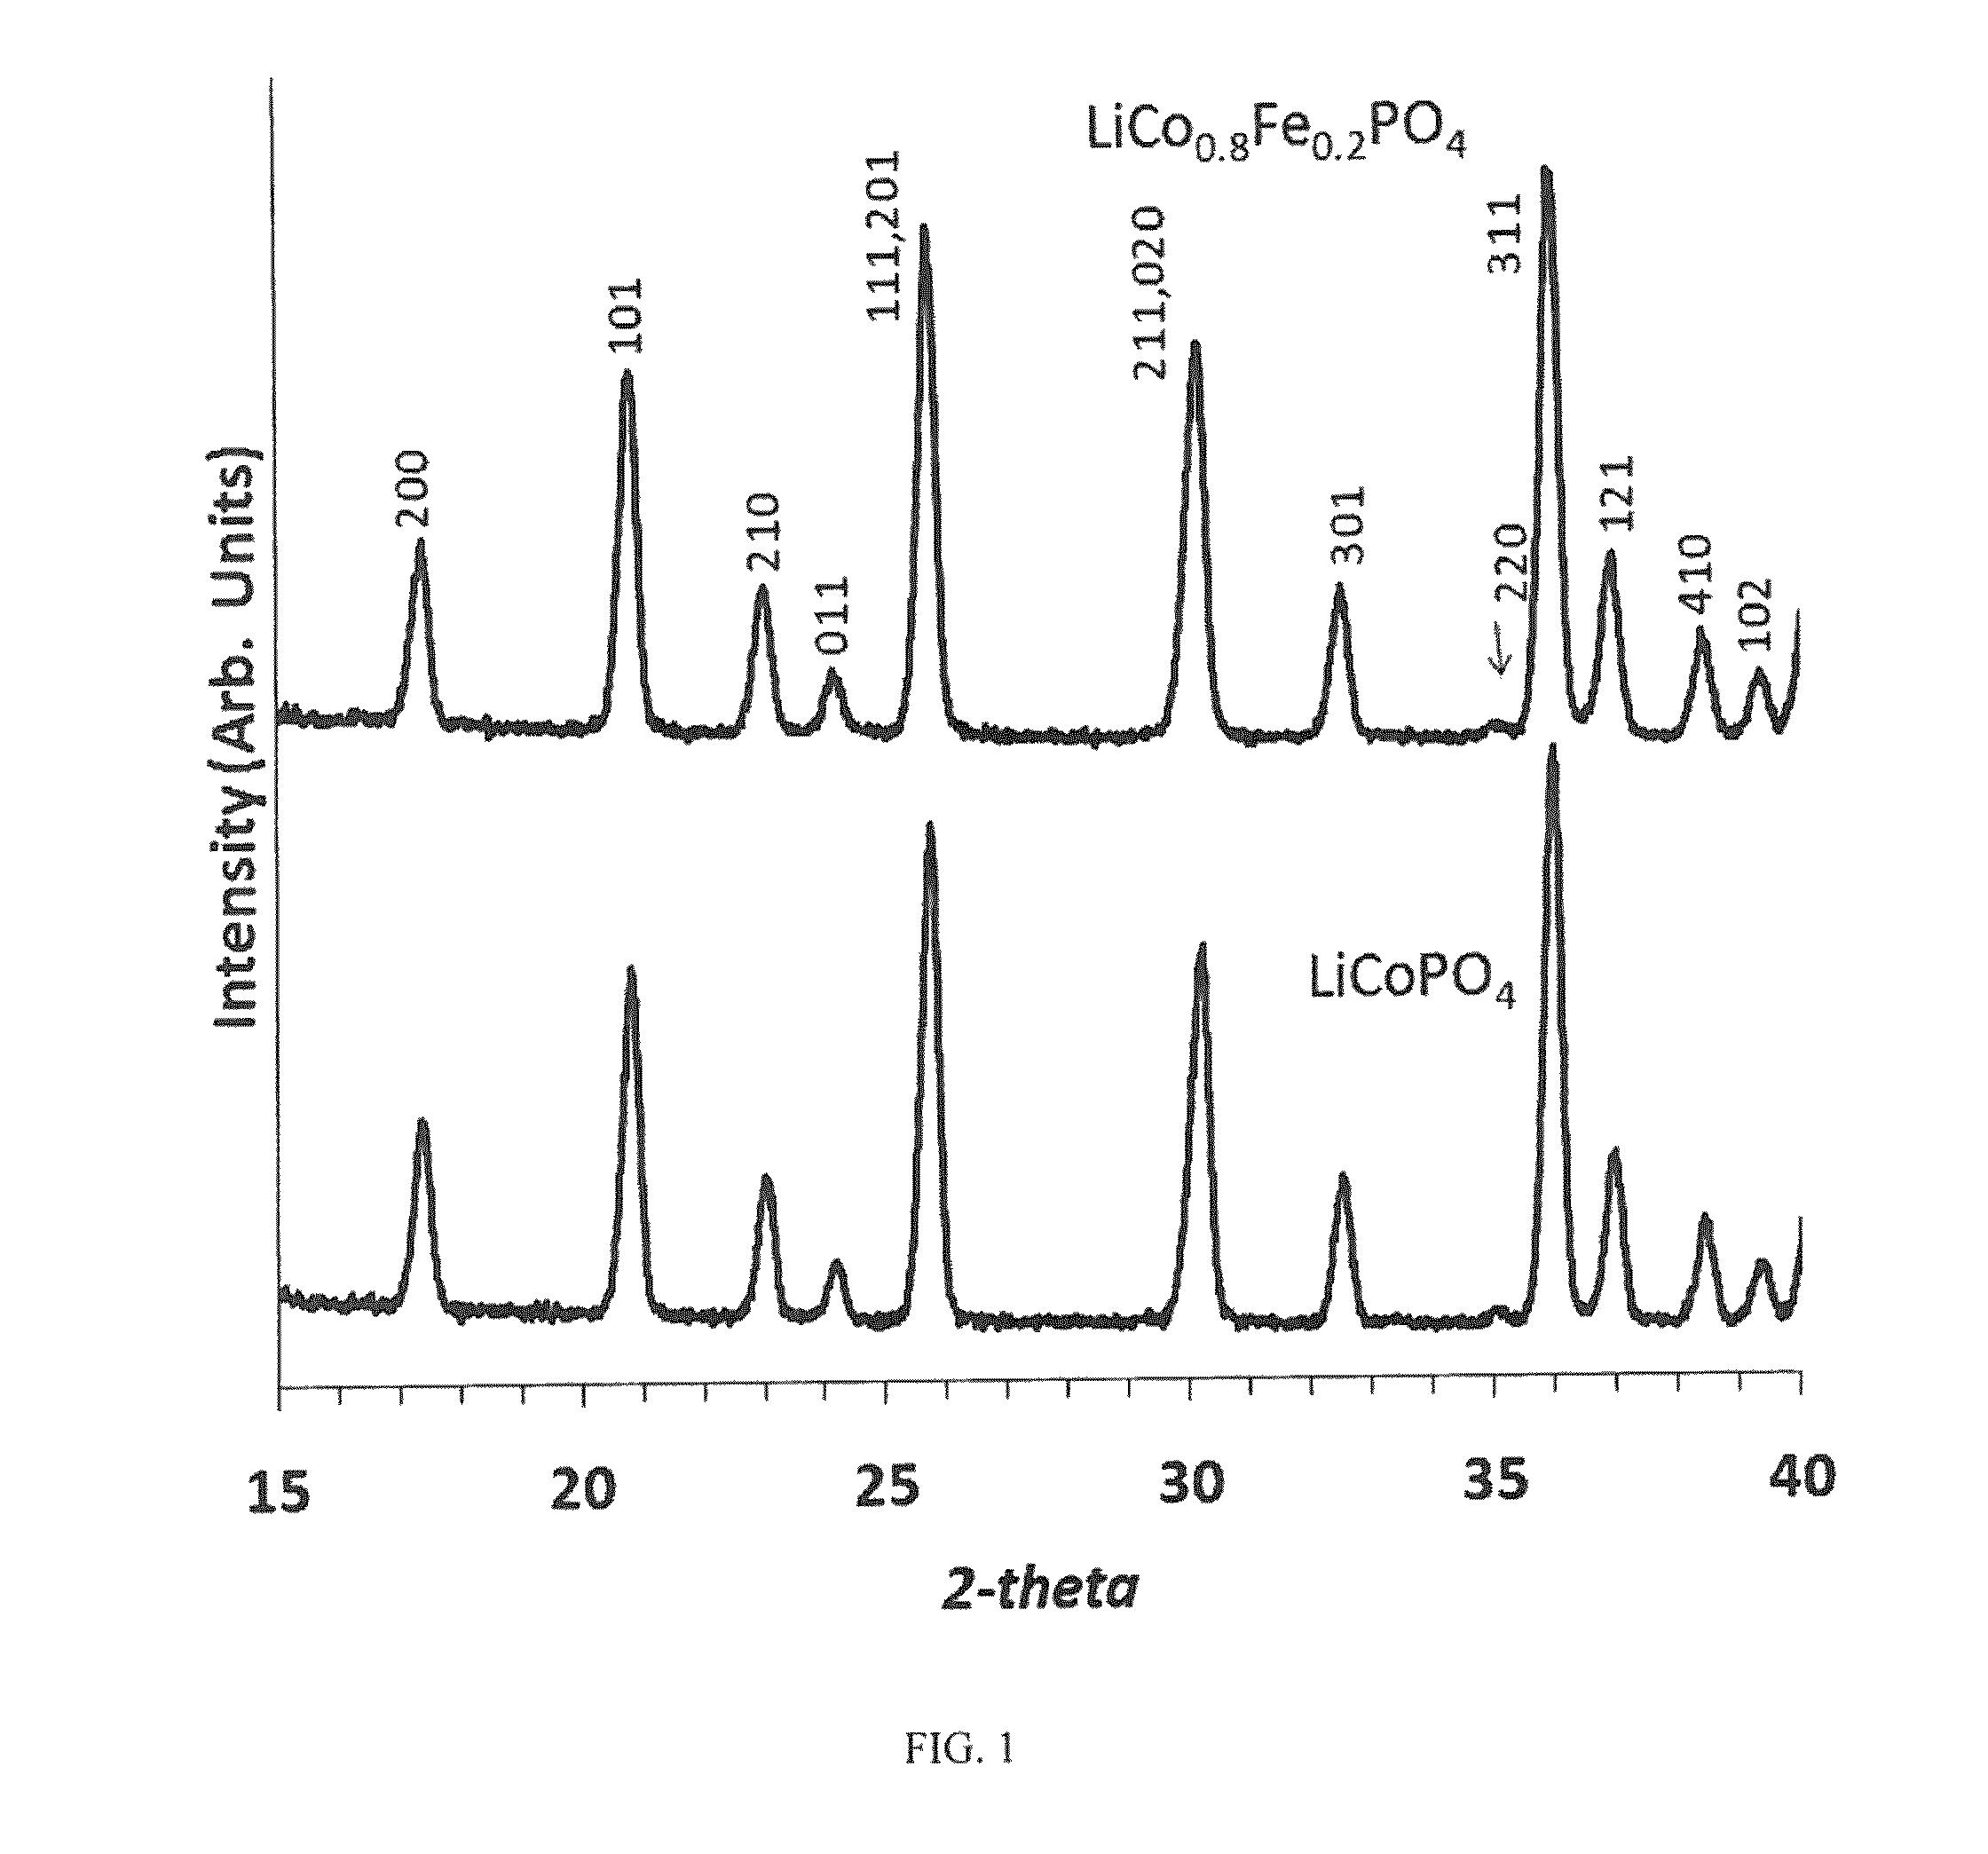 High voltage lithium ion positive electrode material with improved cycle life